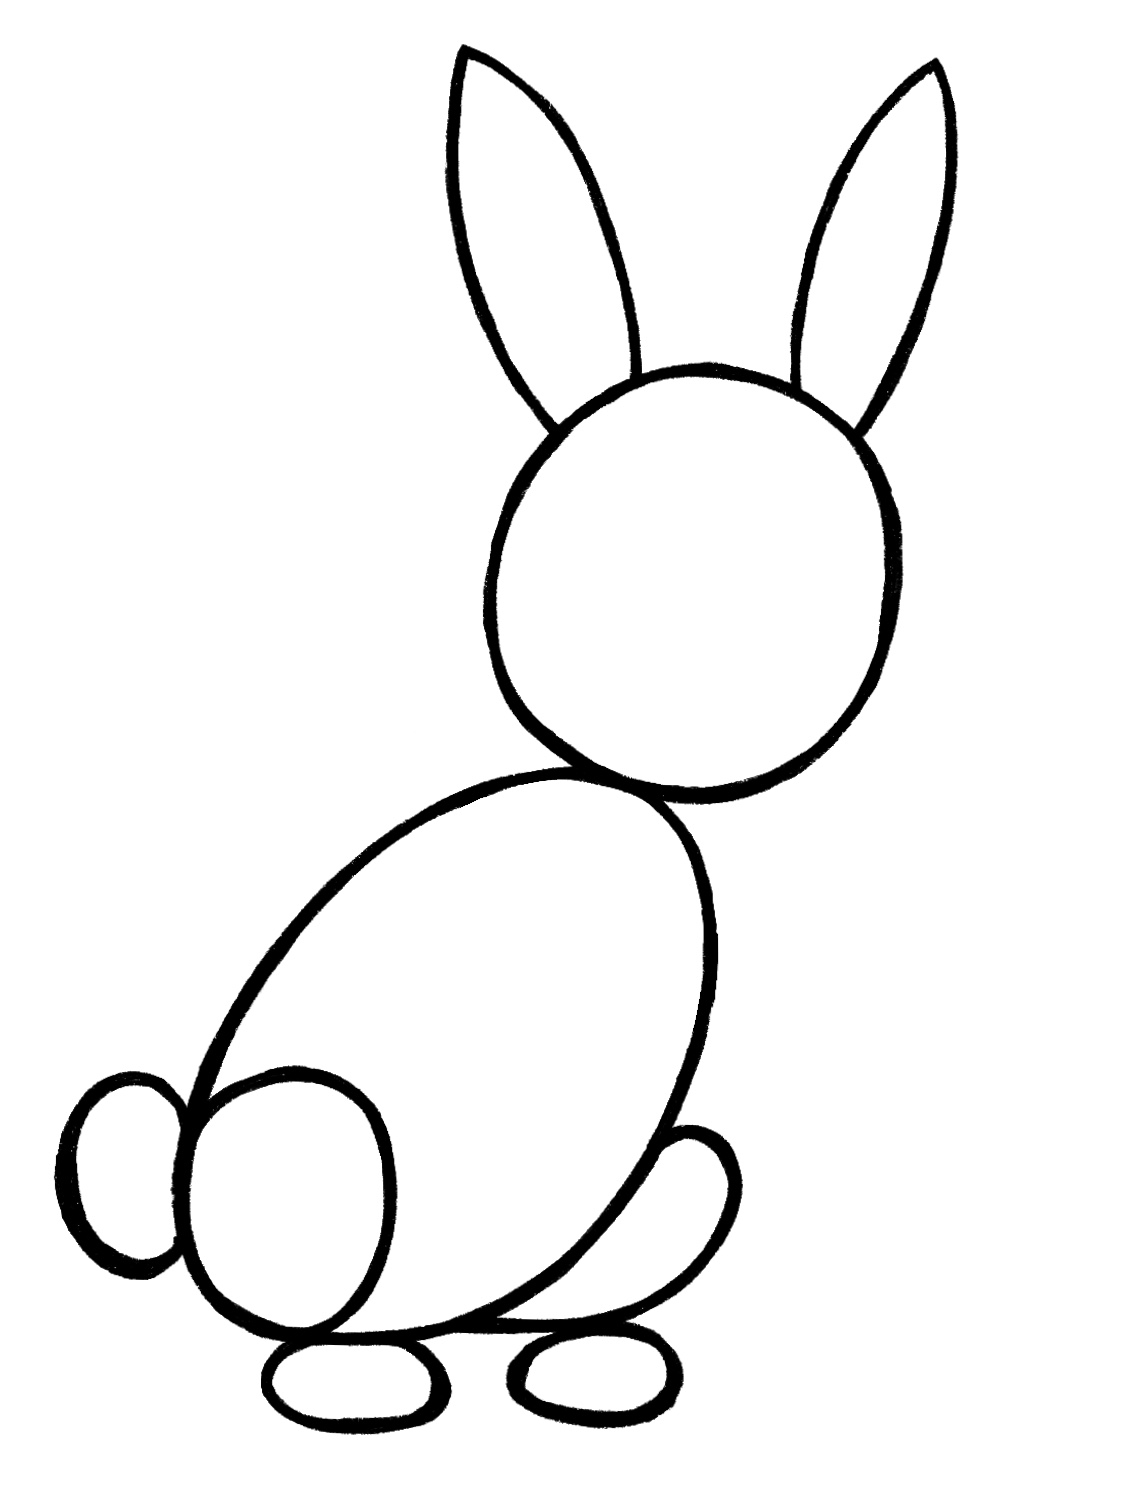 Bunny Drawing - How To Draw A Bunny Step By Step